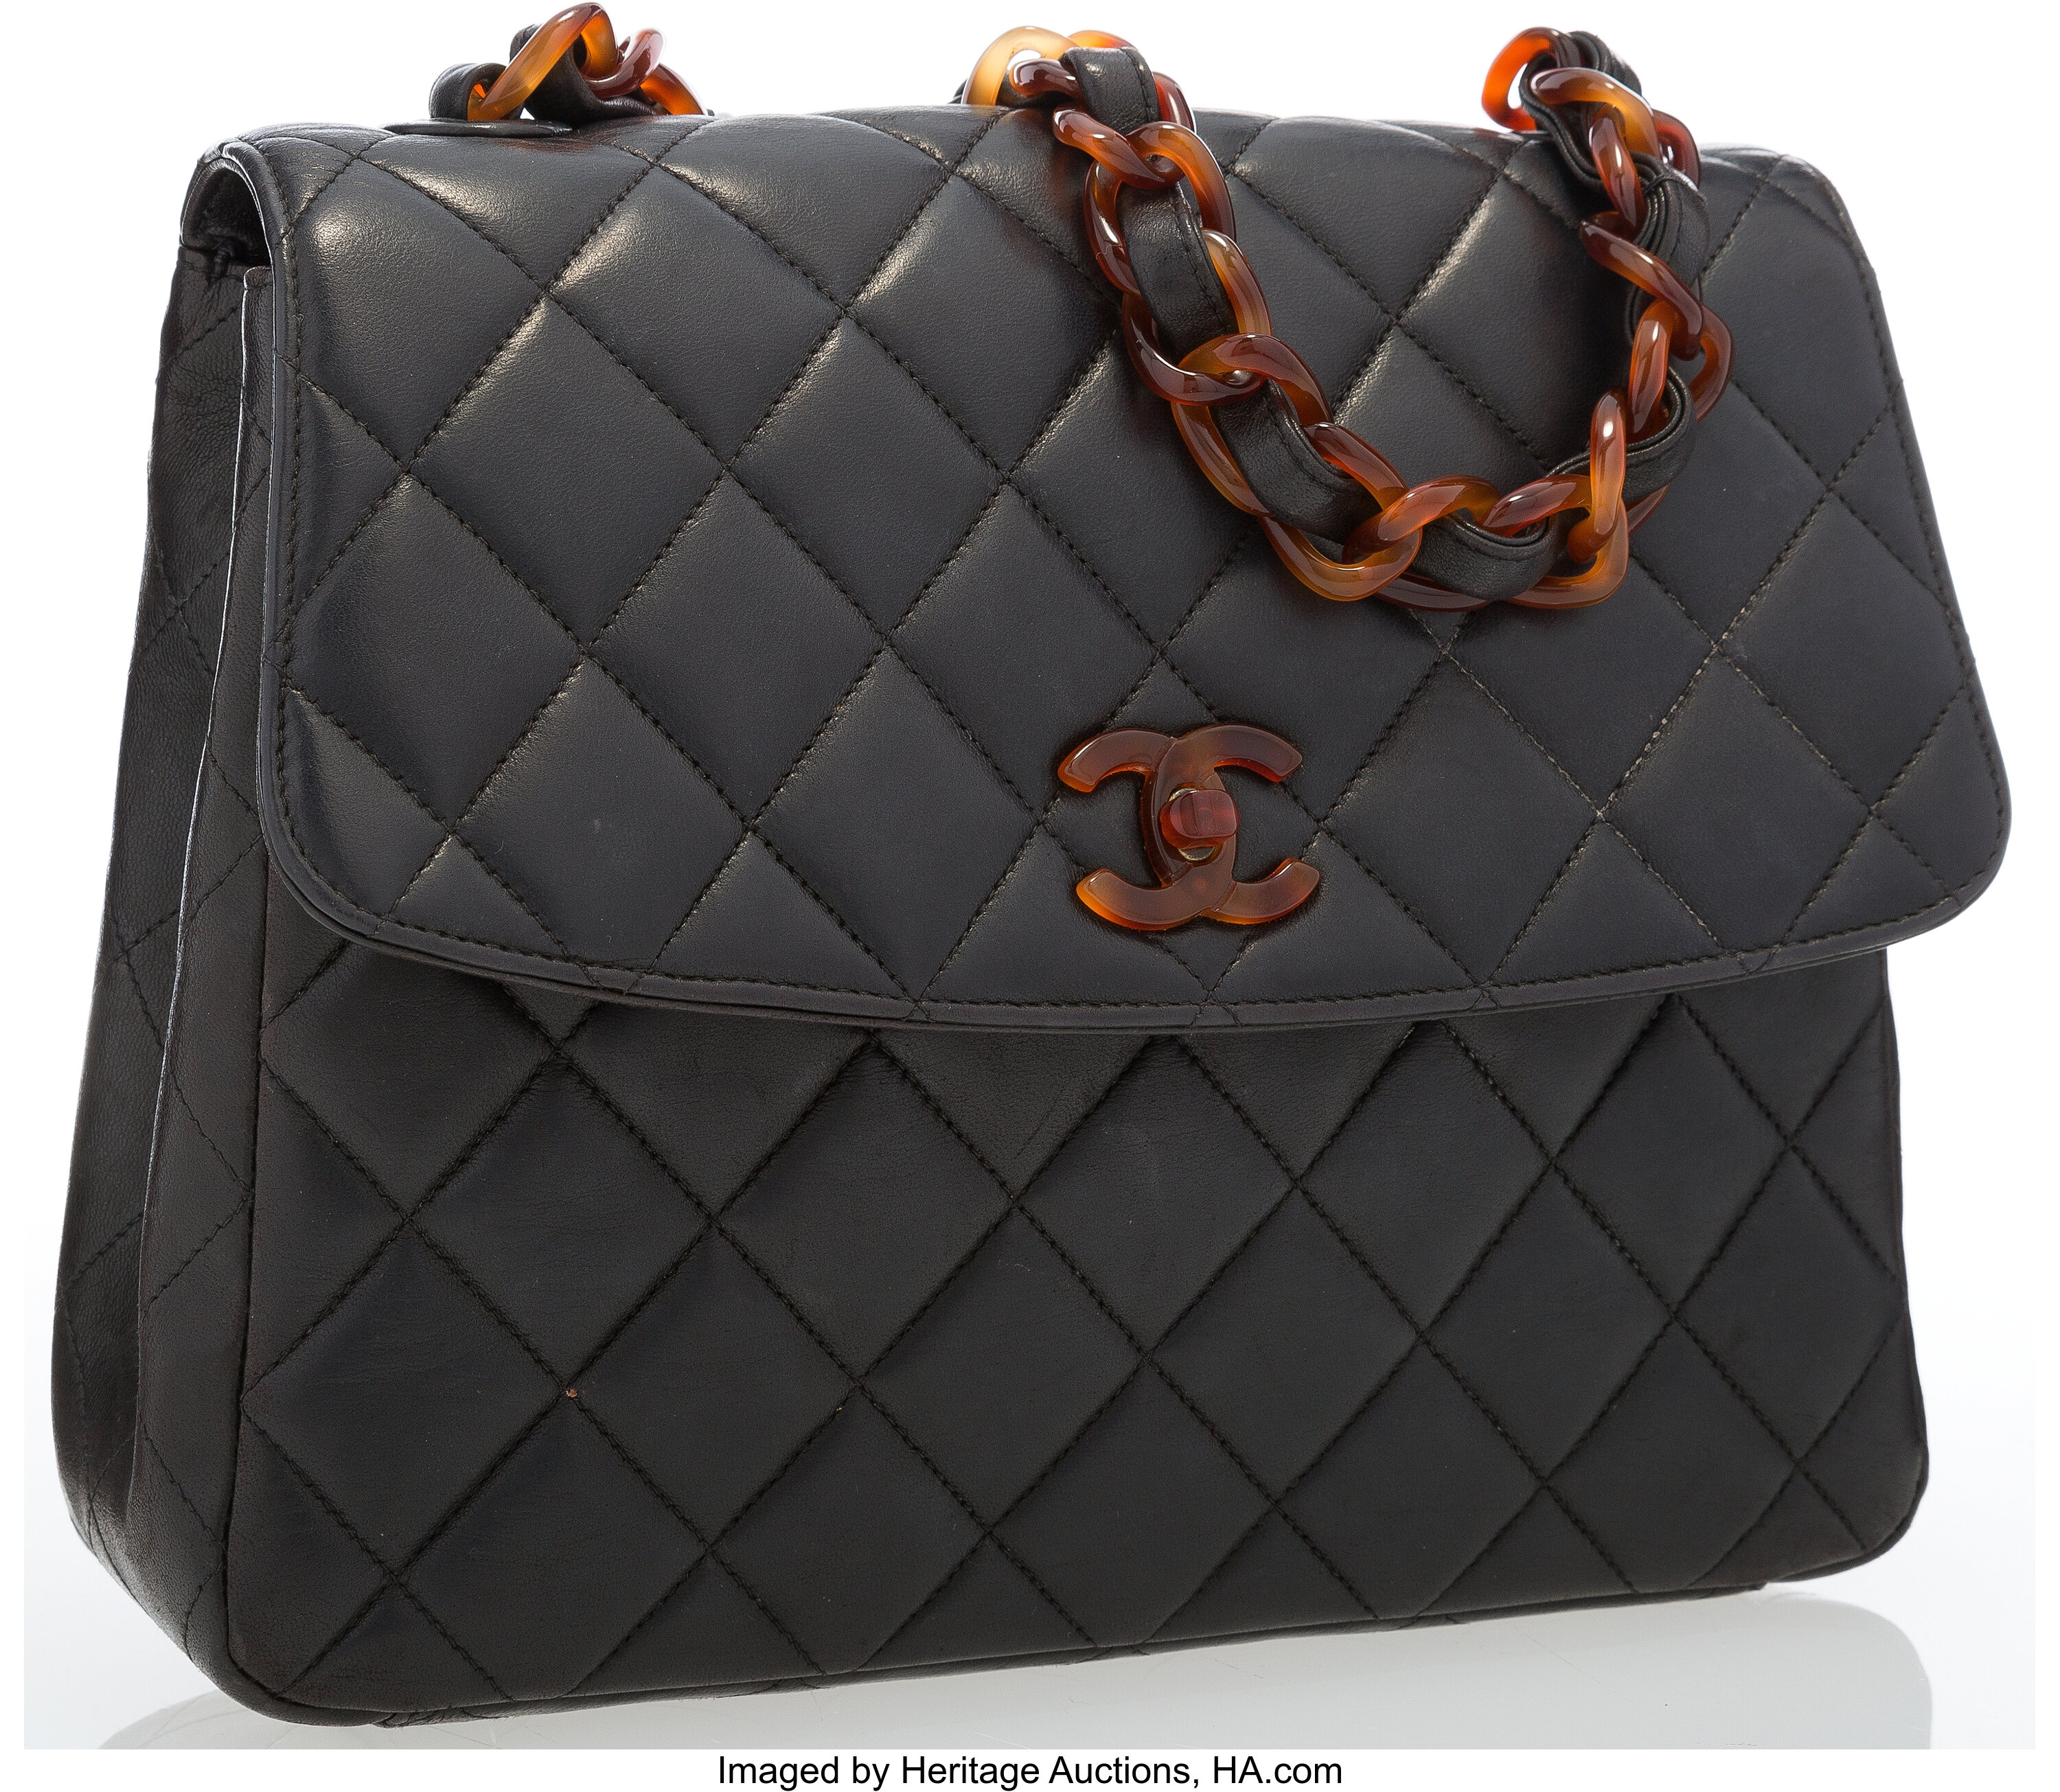 Sold at Auction: CHANEL, A RARE CHANEL NAVY BLUE PYTHON CLASSIC